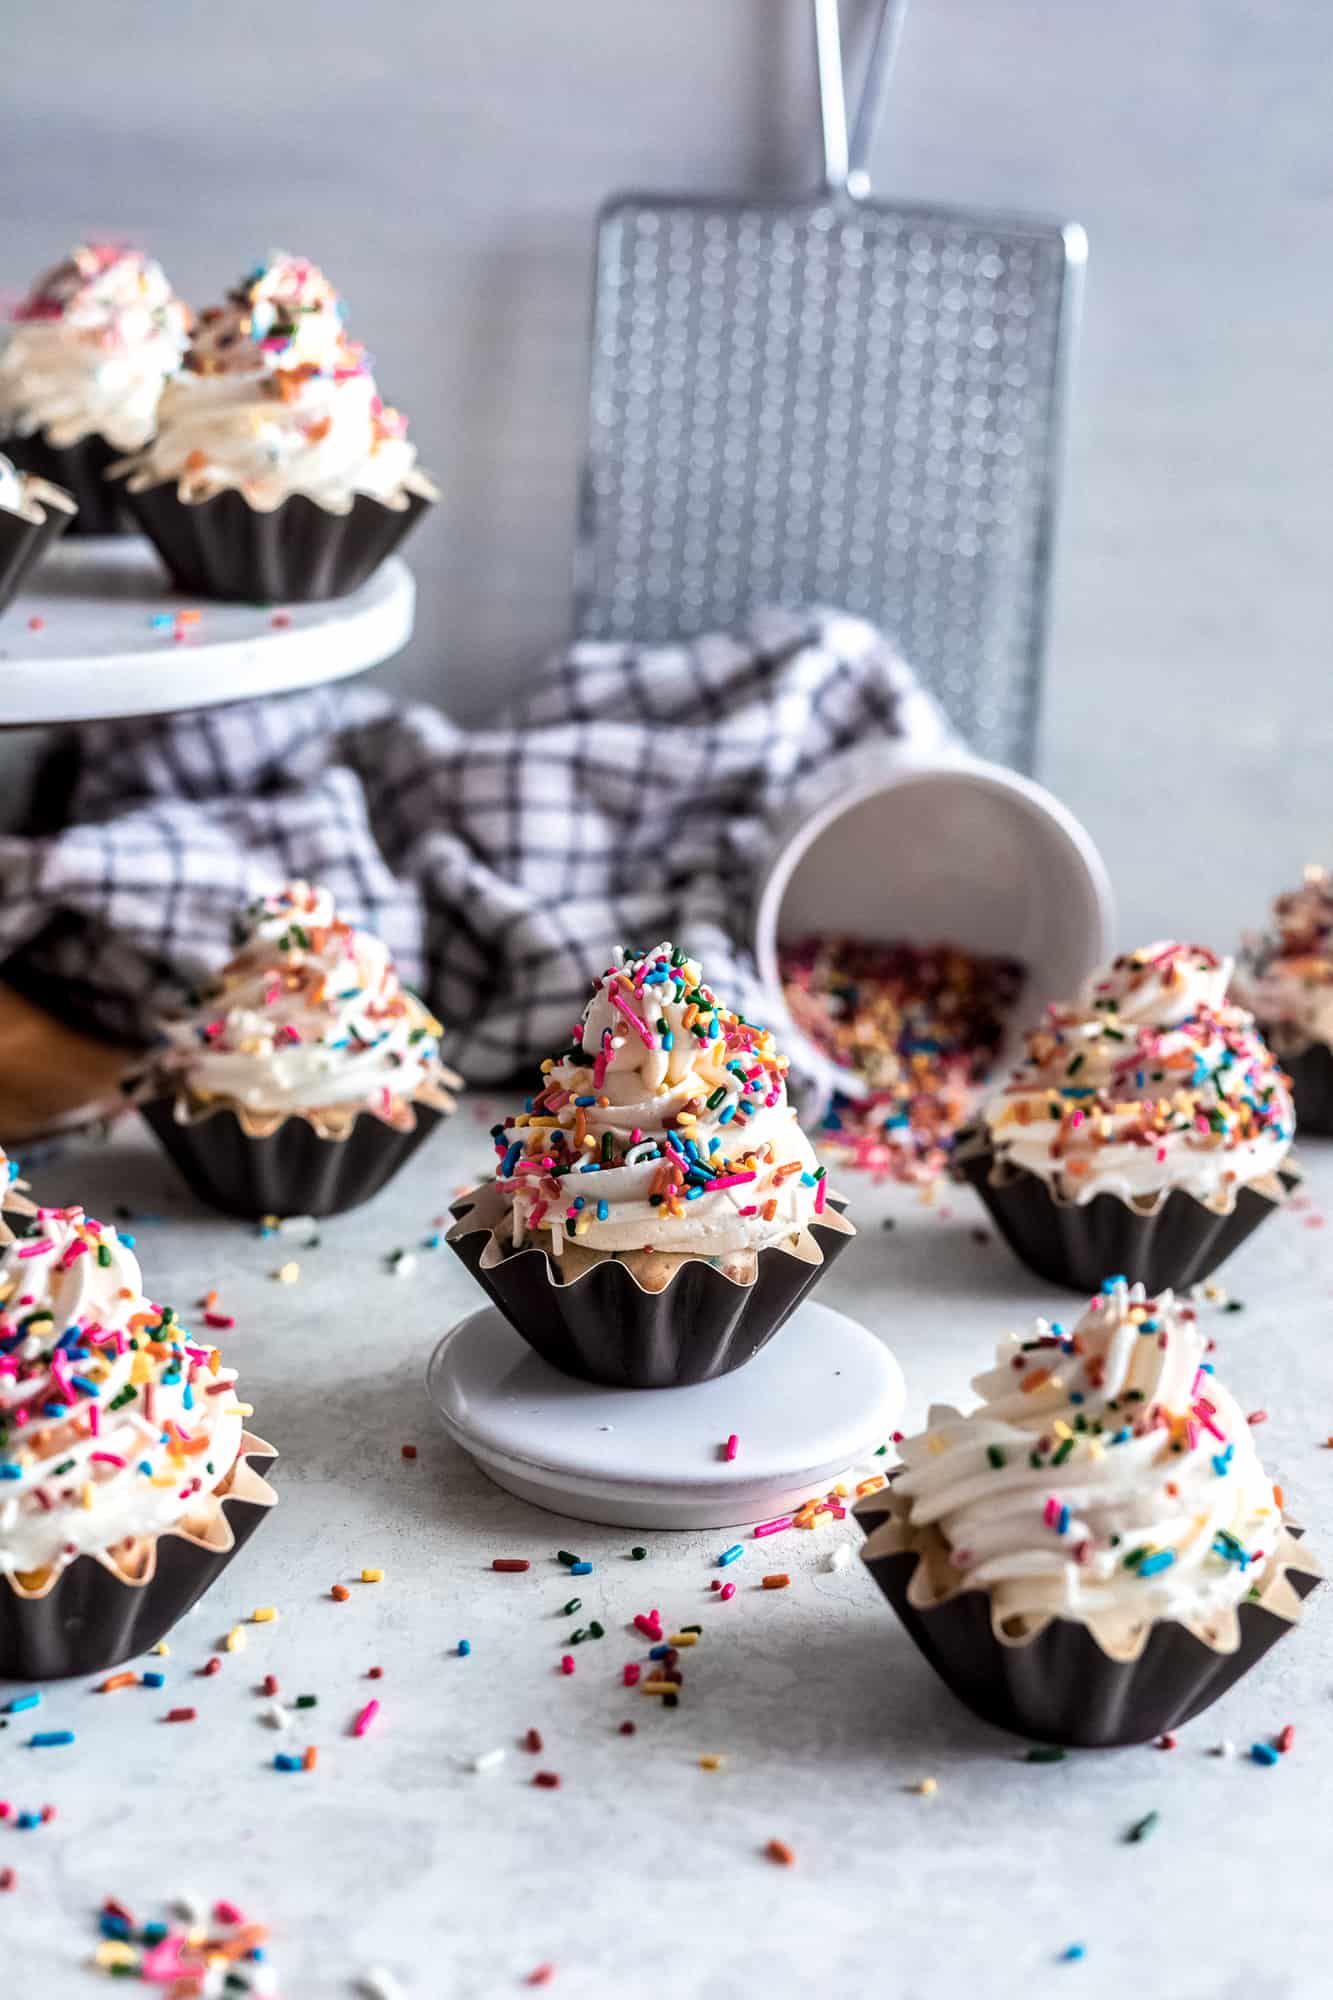 Cupcakes with sprinkles on top on a white surface